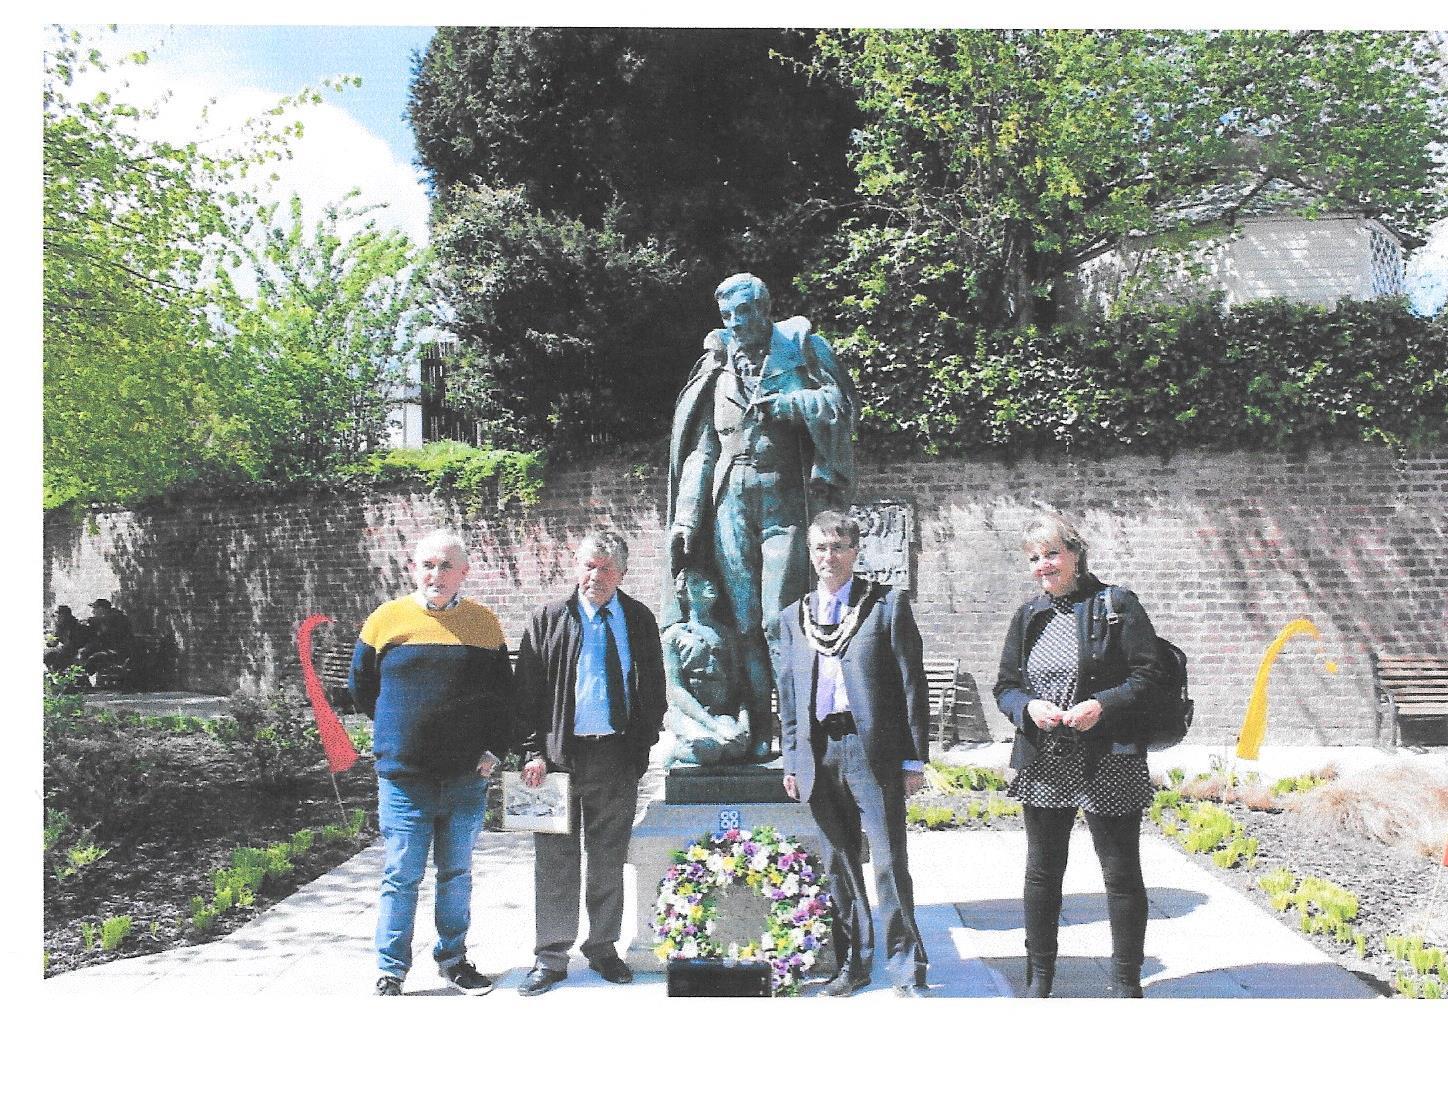 David Smith of Co-op & Mutuals Wales, Mayor David Selby, and Rex Shayler were joined by a representative of Ysgol Dafydd Llwyd at the presentation of a wreath at the statue of Robert Owen. Picture by Andy Newham.